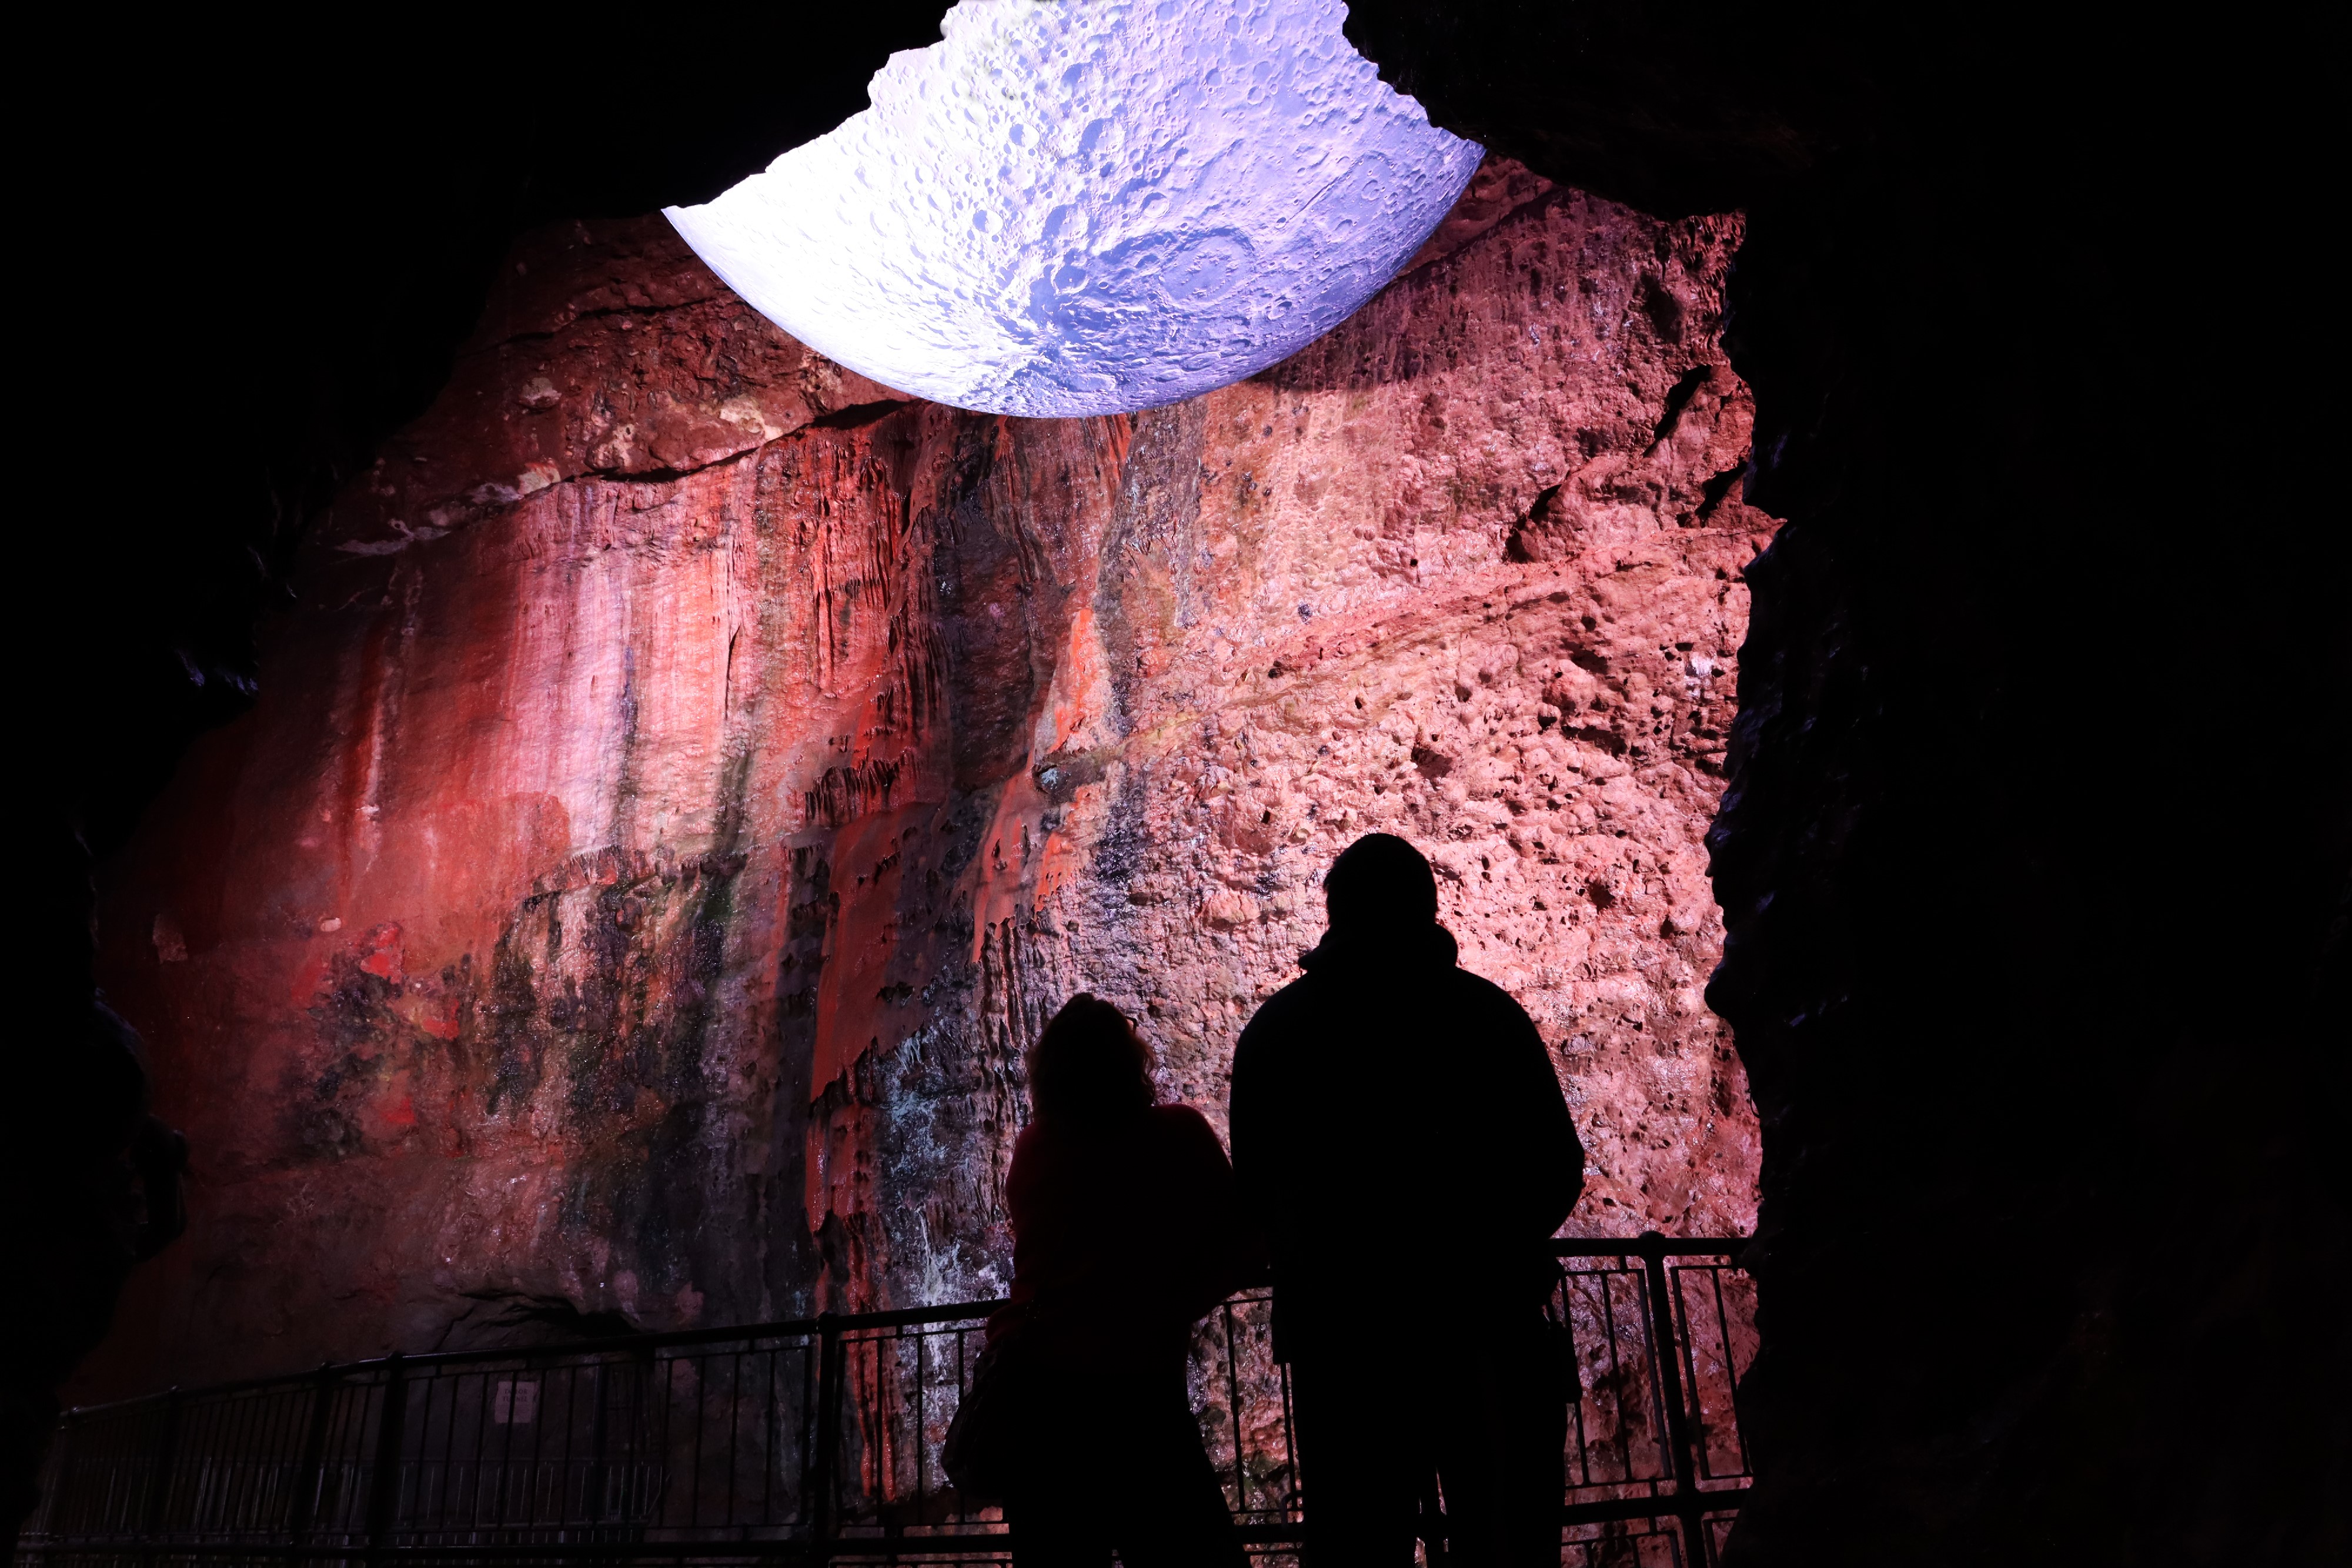 The Moon at Wookey Hole Caves. image thanks to Cottle Family